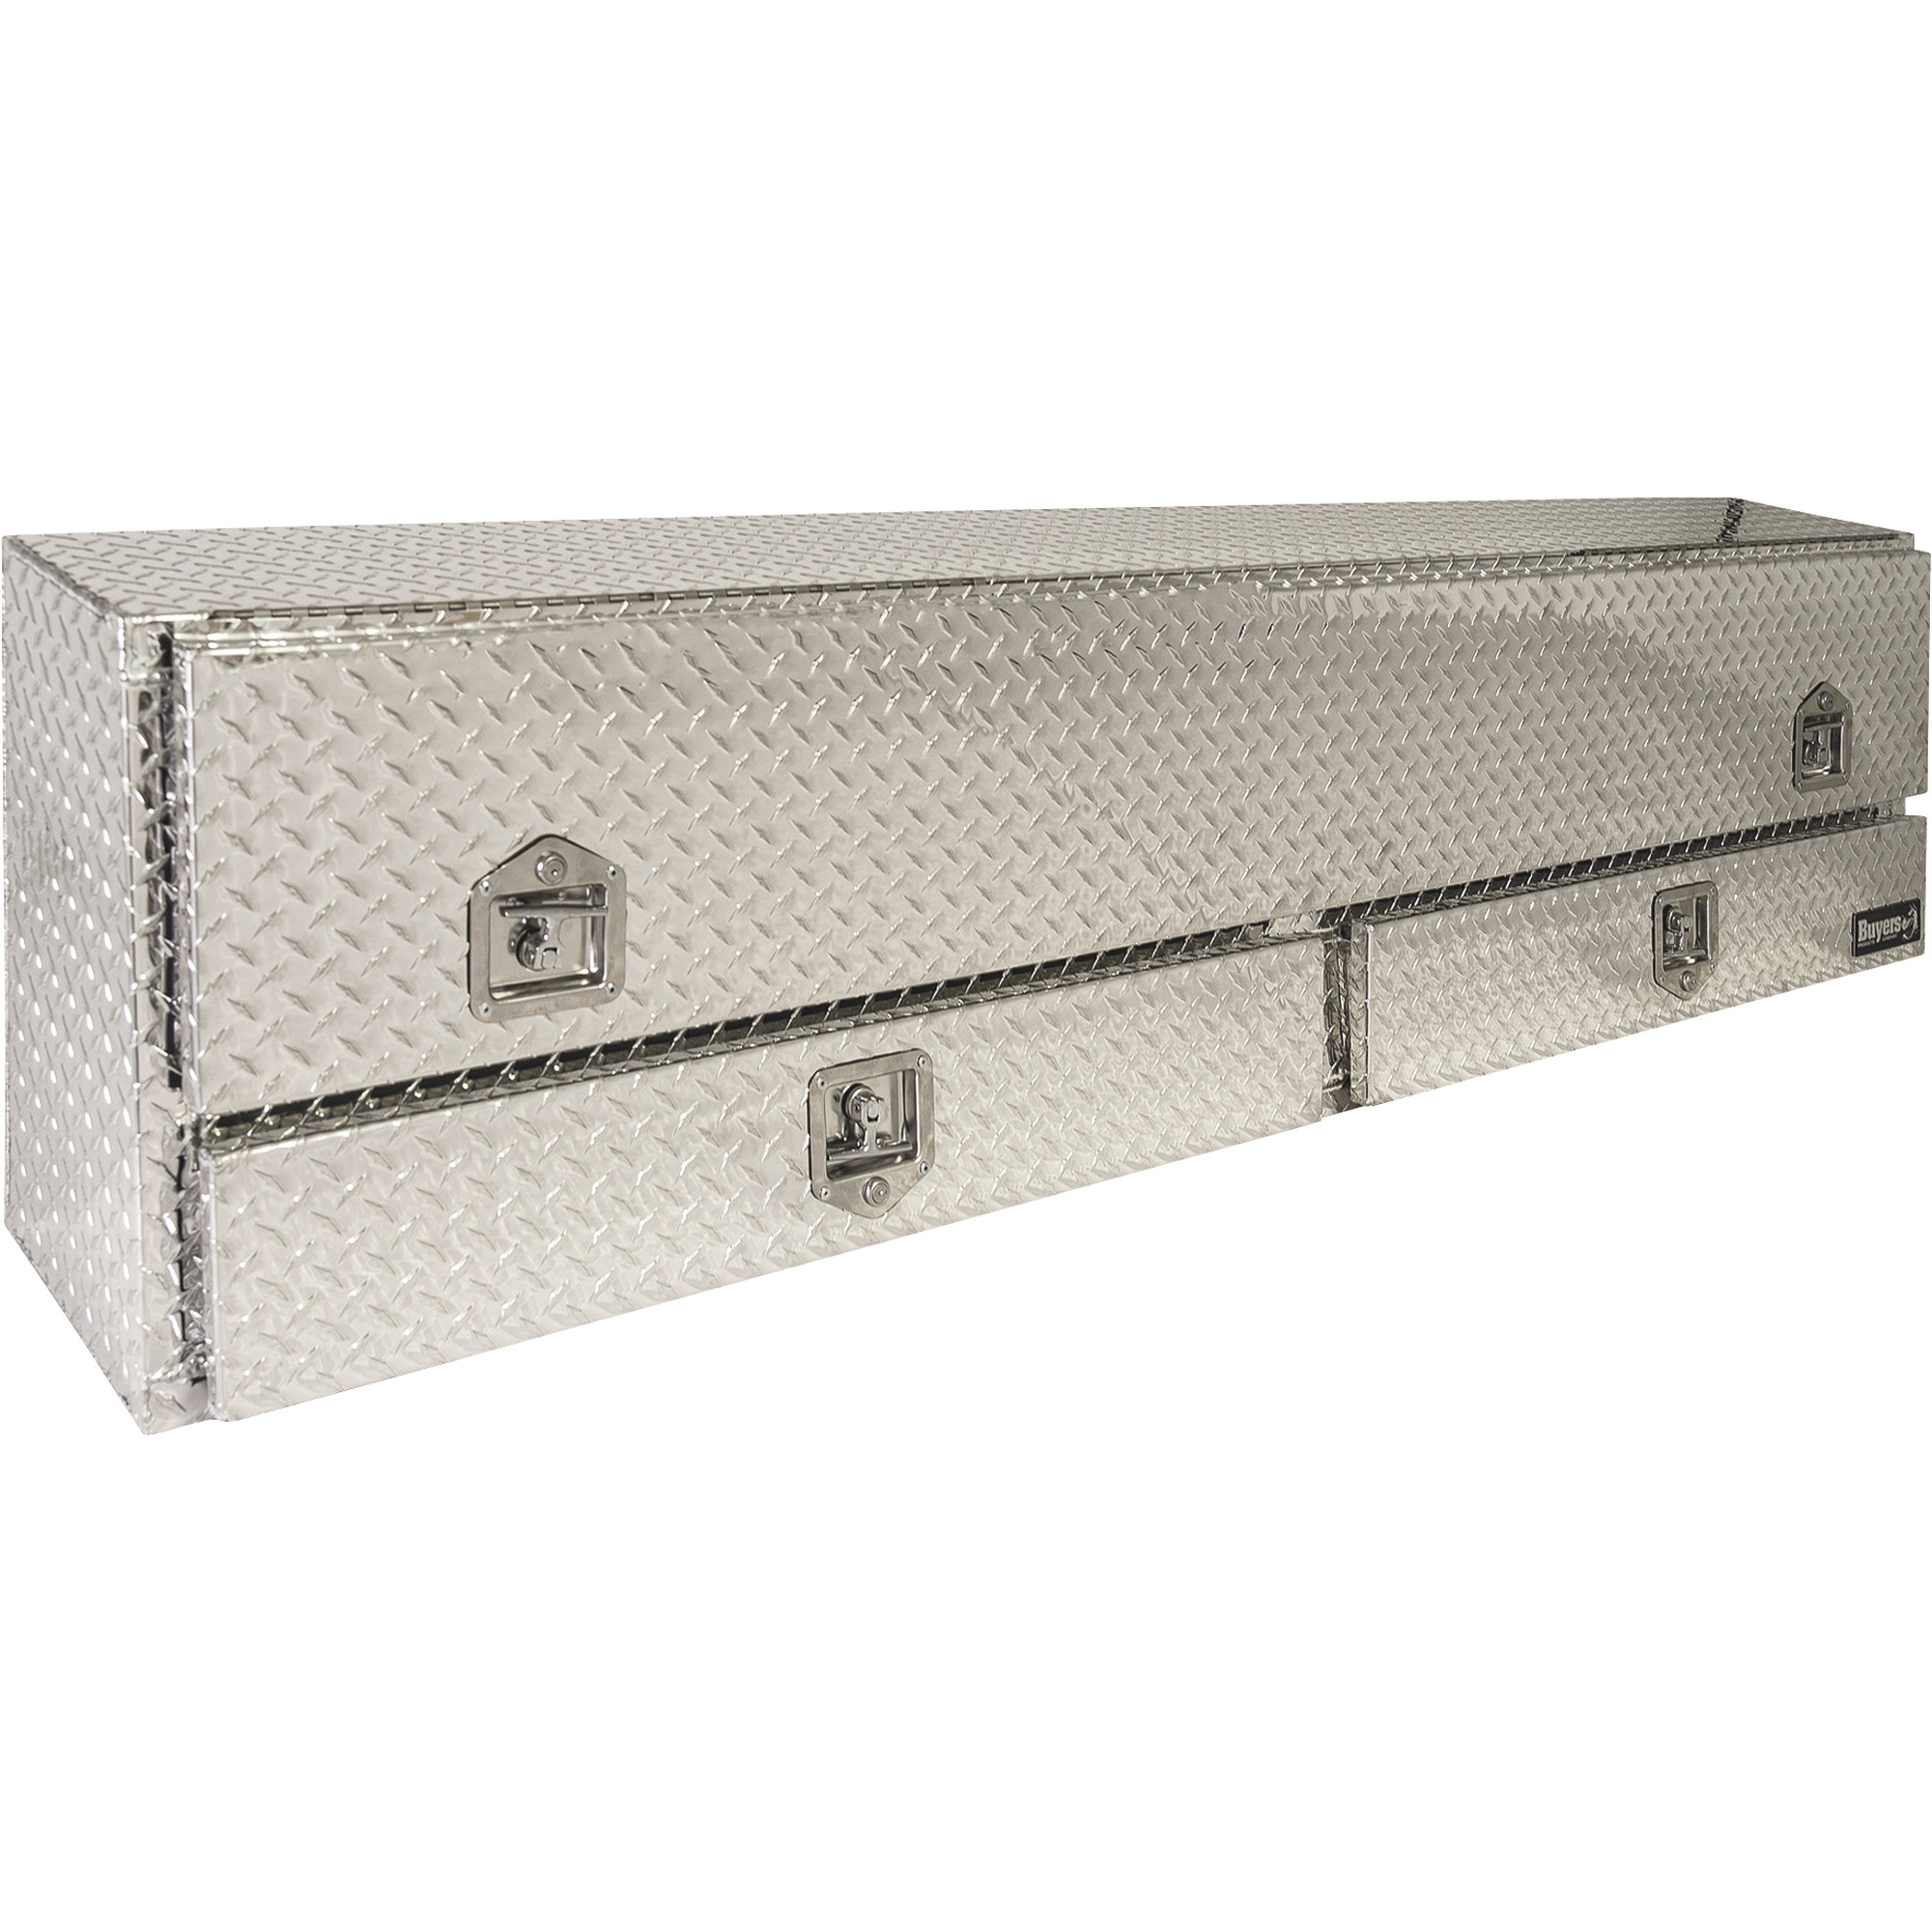 Buyers Products Top-Mount Truck Tool Box with Drawers, Aluminum, Diamond Plate, T-Handle Latches, 72Inch X 21Inch X 13.5Inch, Model 1705641